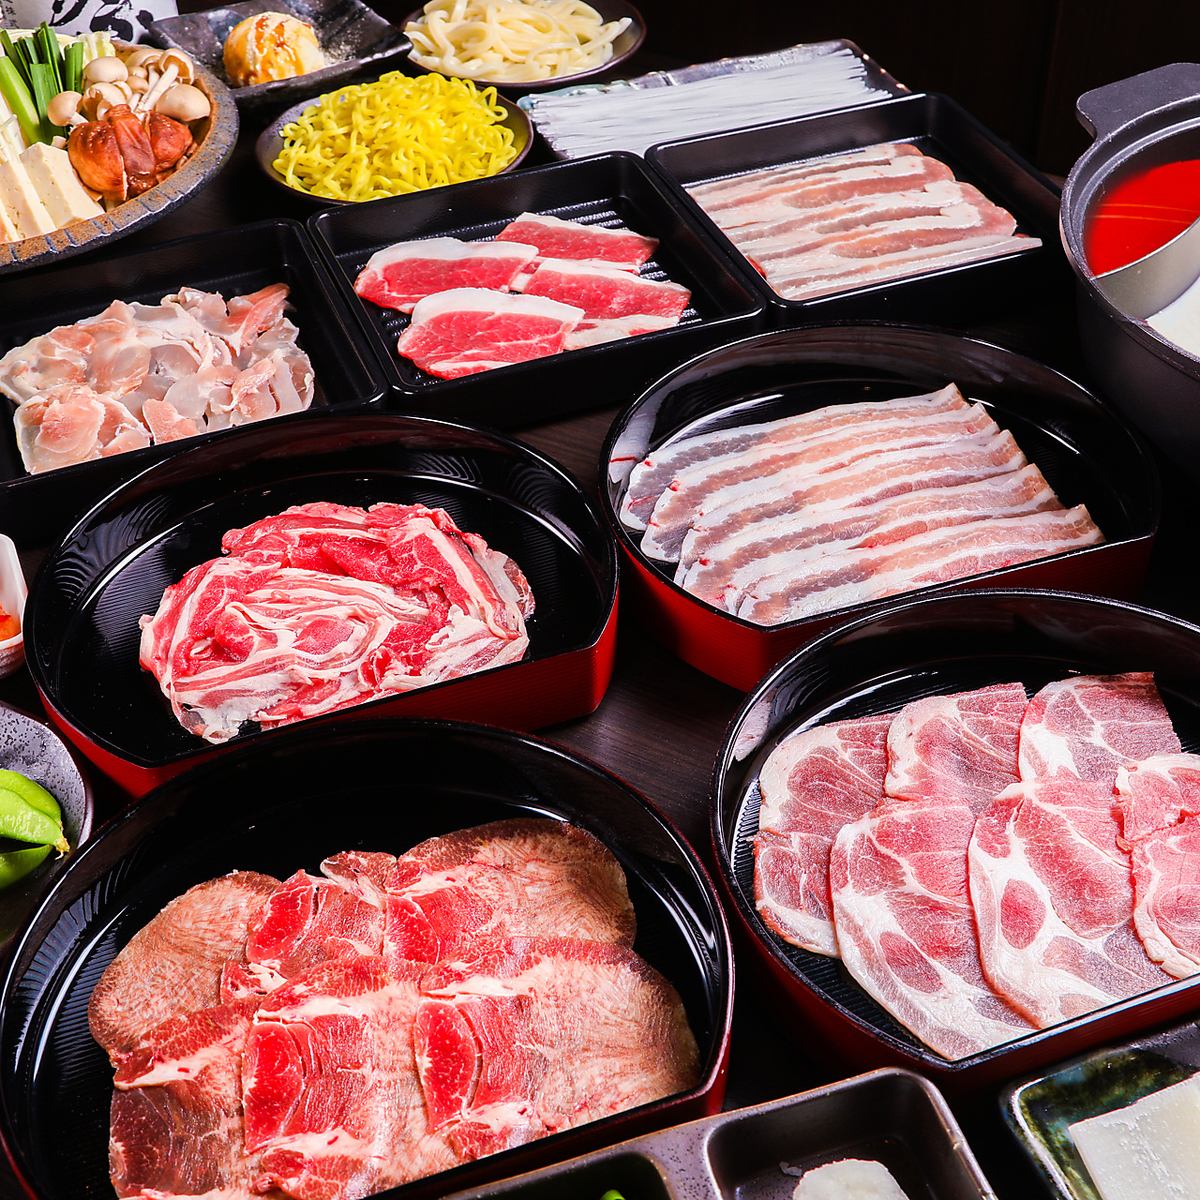 Family ◎! Half price for elementary school students, all-you-can-eat shabu-shabu for less than elementary school students!